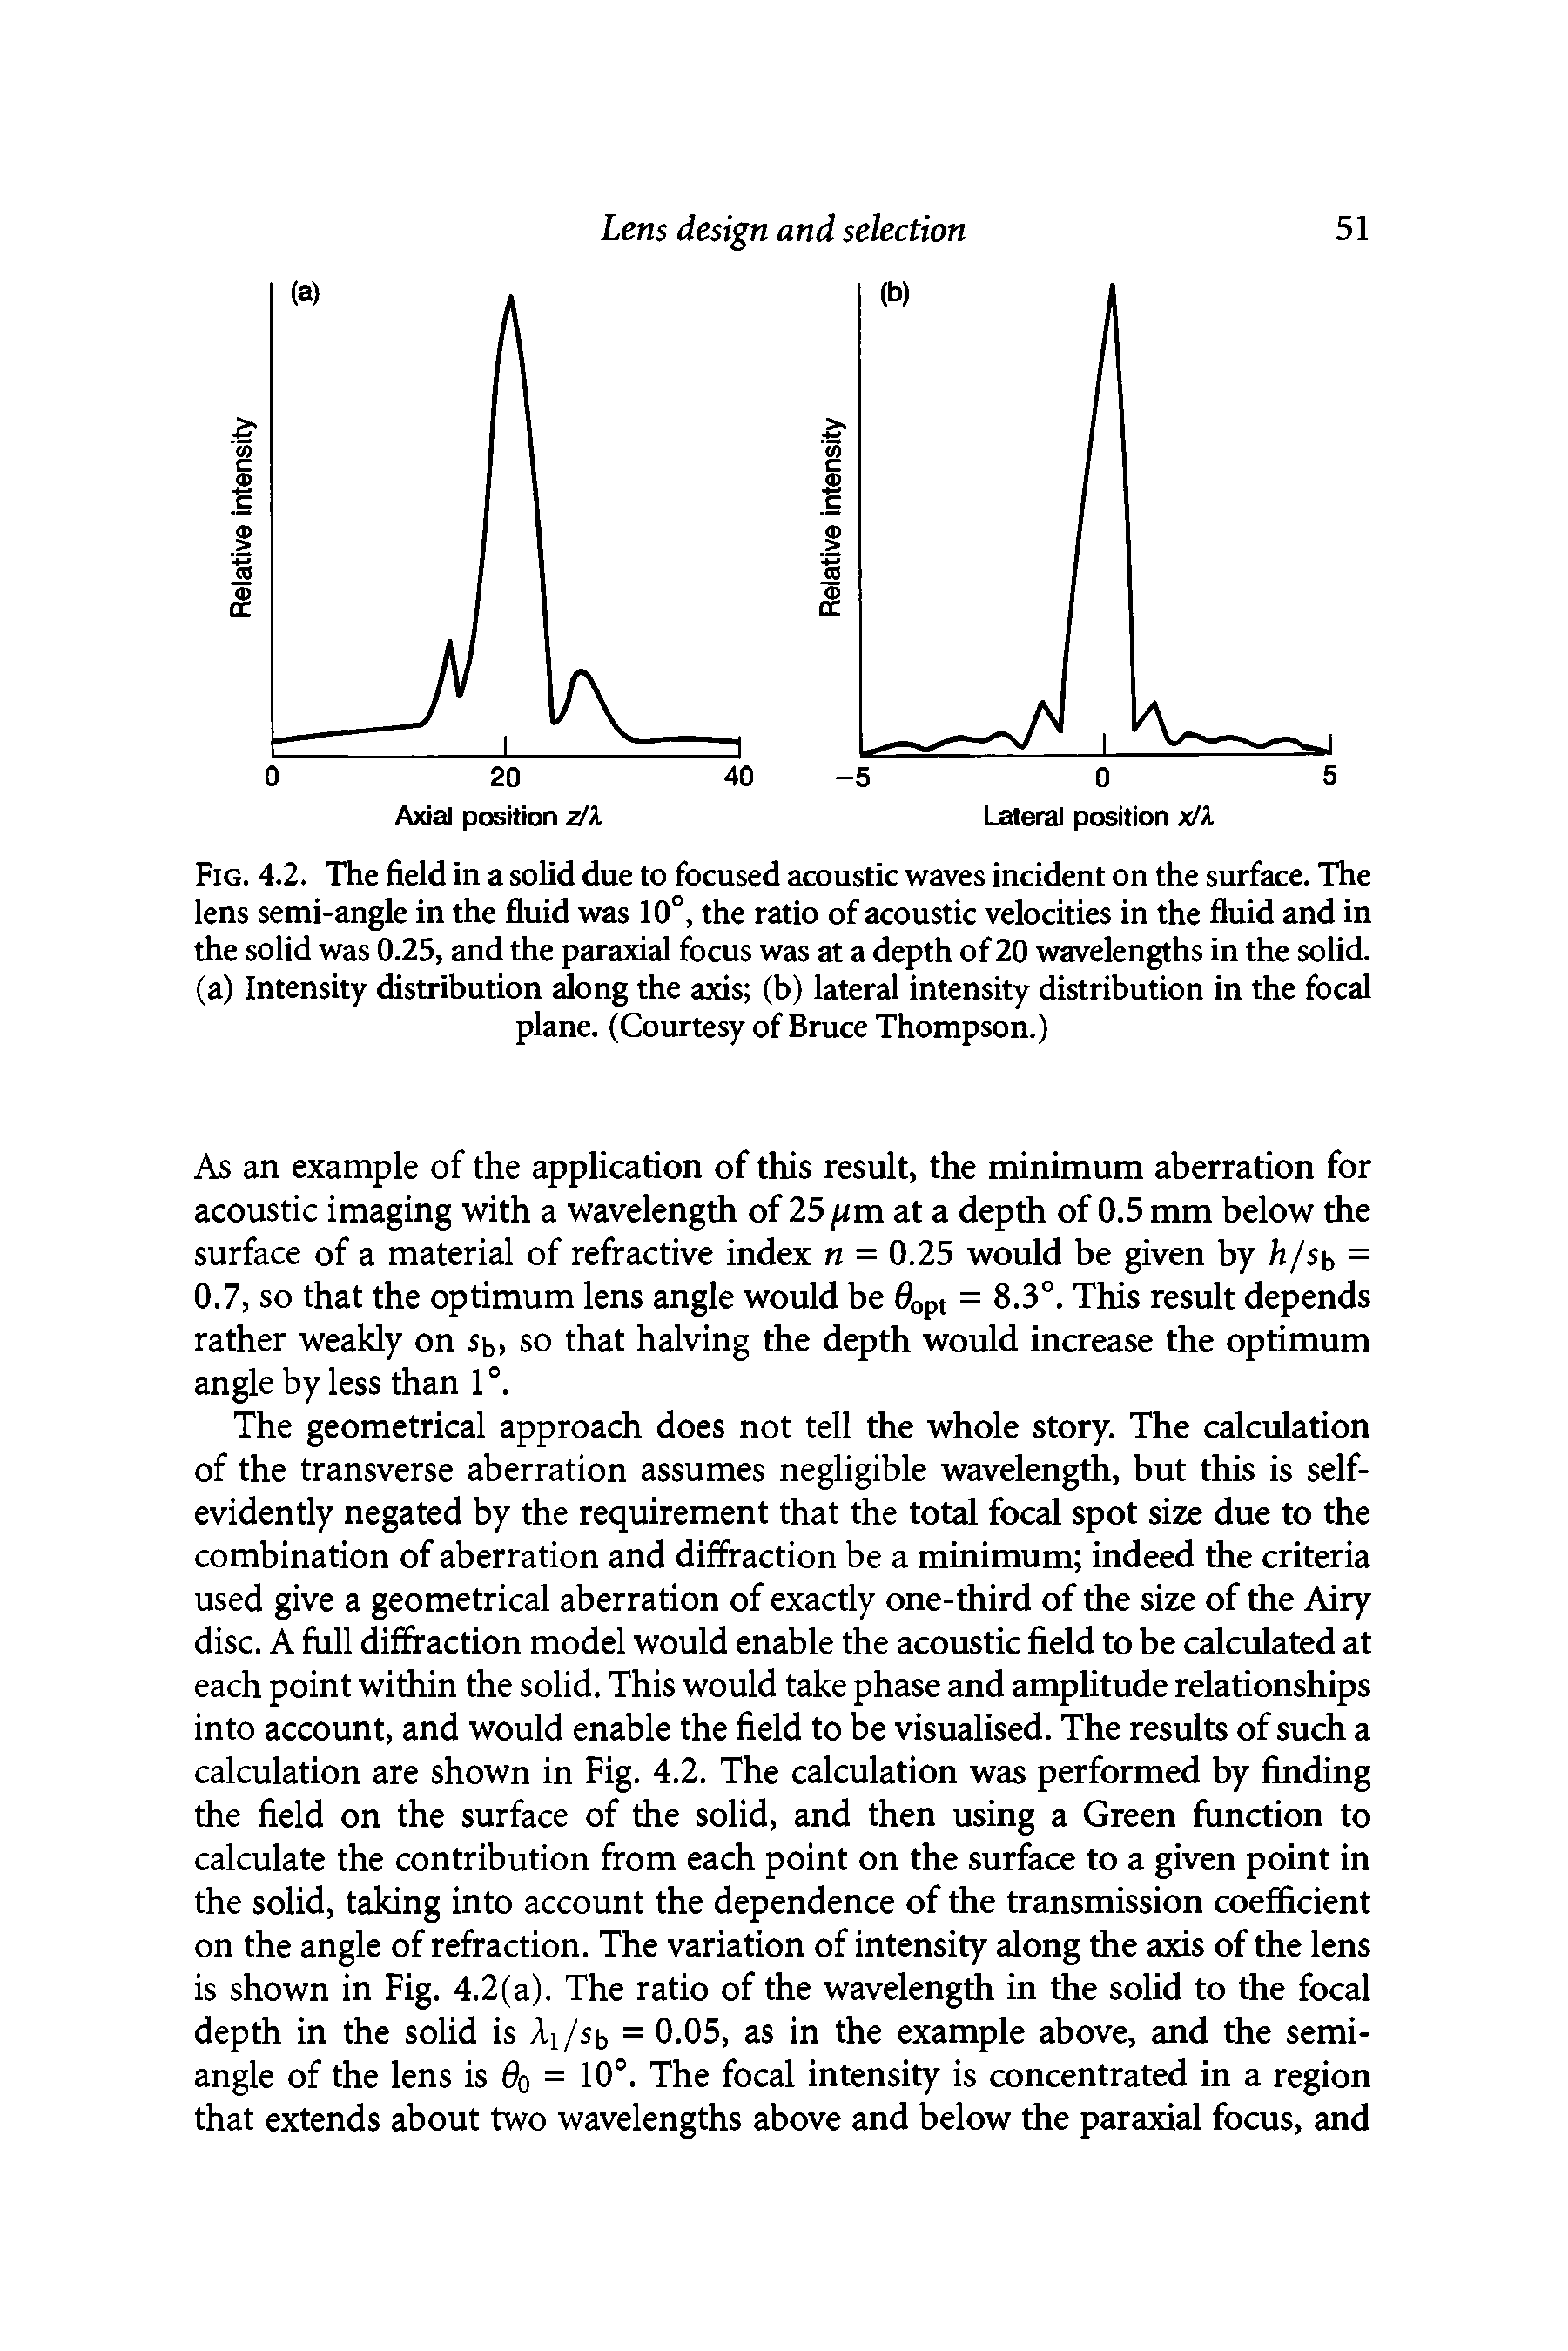 Fig. 4.2. The field in a solid due to focused acoustic waves incident on the surface. The lens semi-angle in the fluid was 10°, the ratio of acoustic velocities in the fluid and in the solid was 0.25, and the paraxial focus was at a depth of 20 wavelengths in the solid, (a) Intensity distribution along the axis (b) lateral intensity distribution in the focal plane. (Courtesy of Bruce Thompson.)...